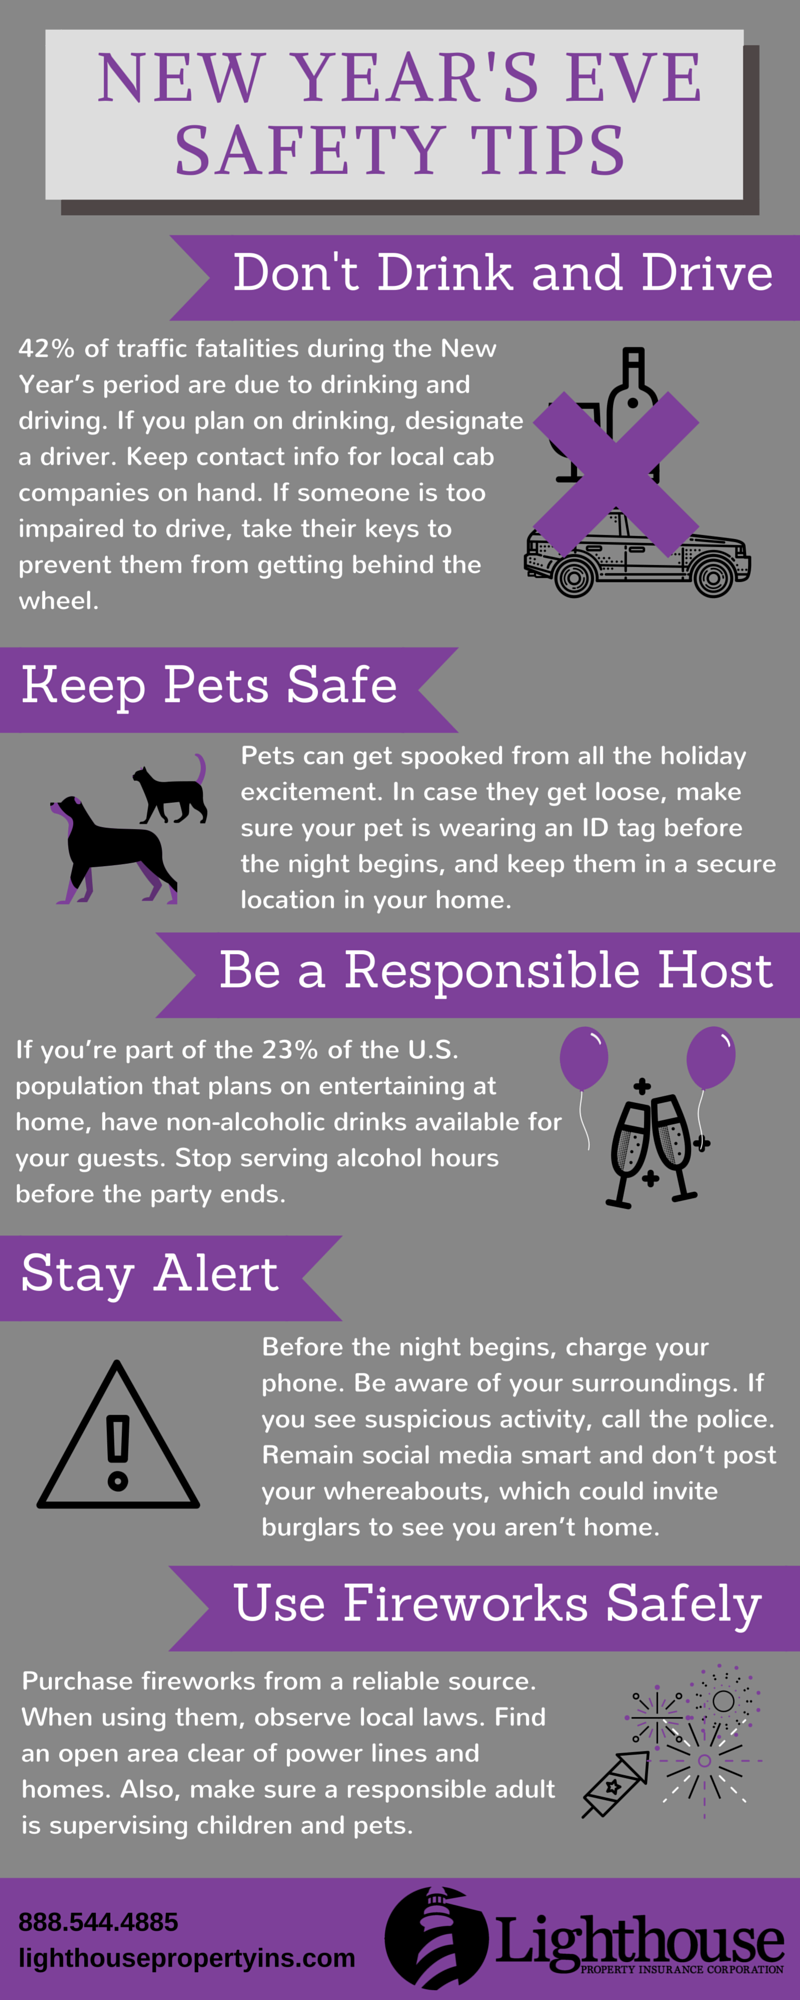 Stay safe while bringing in 2016 with these tips from Lighthouse Property Insurance Corporation.